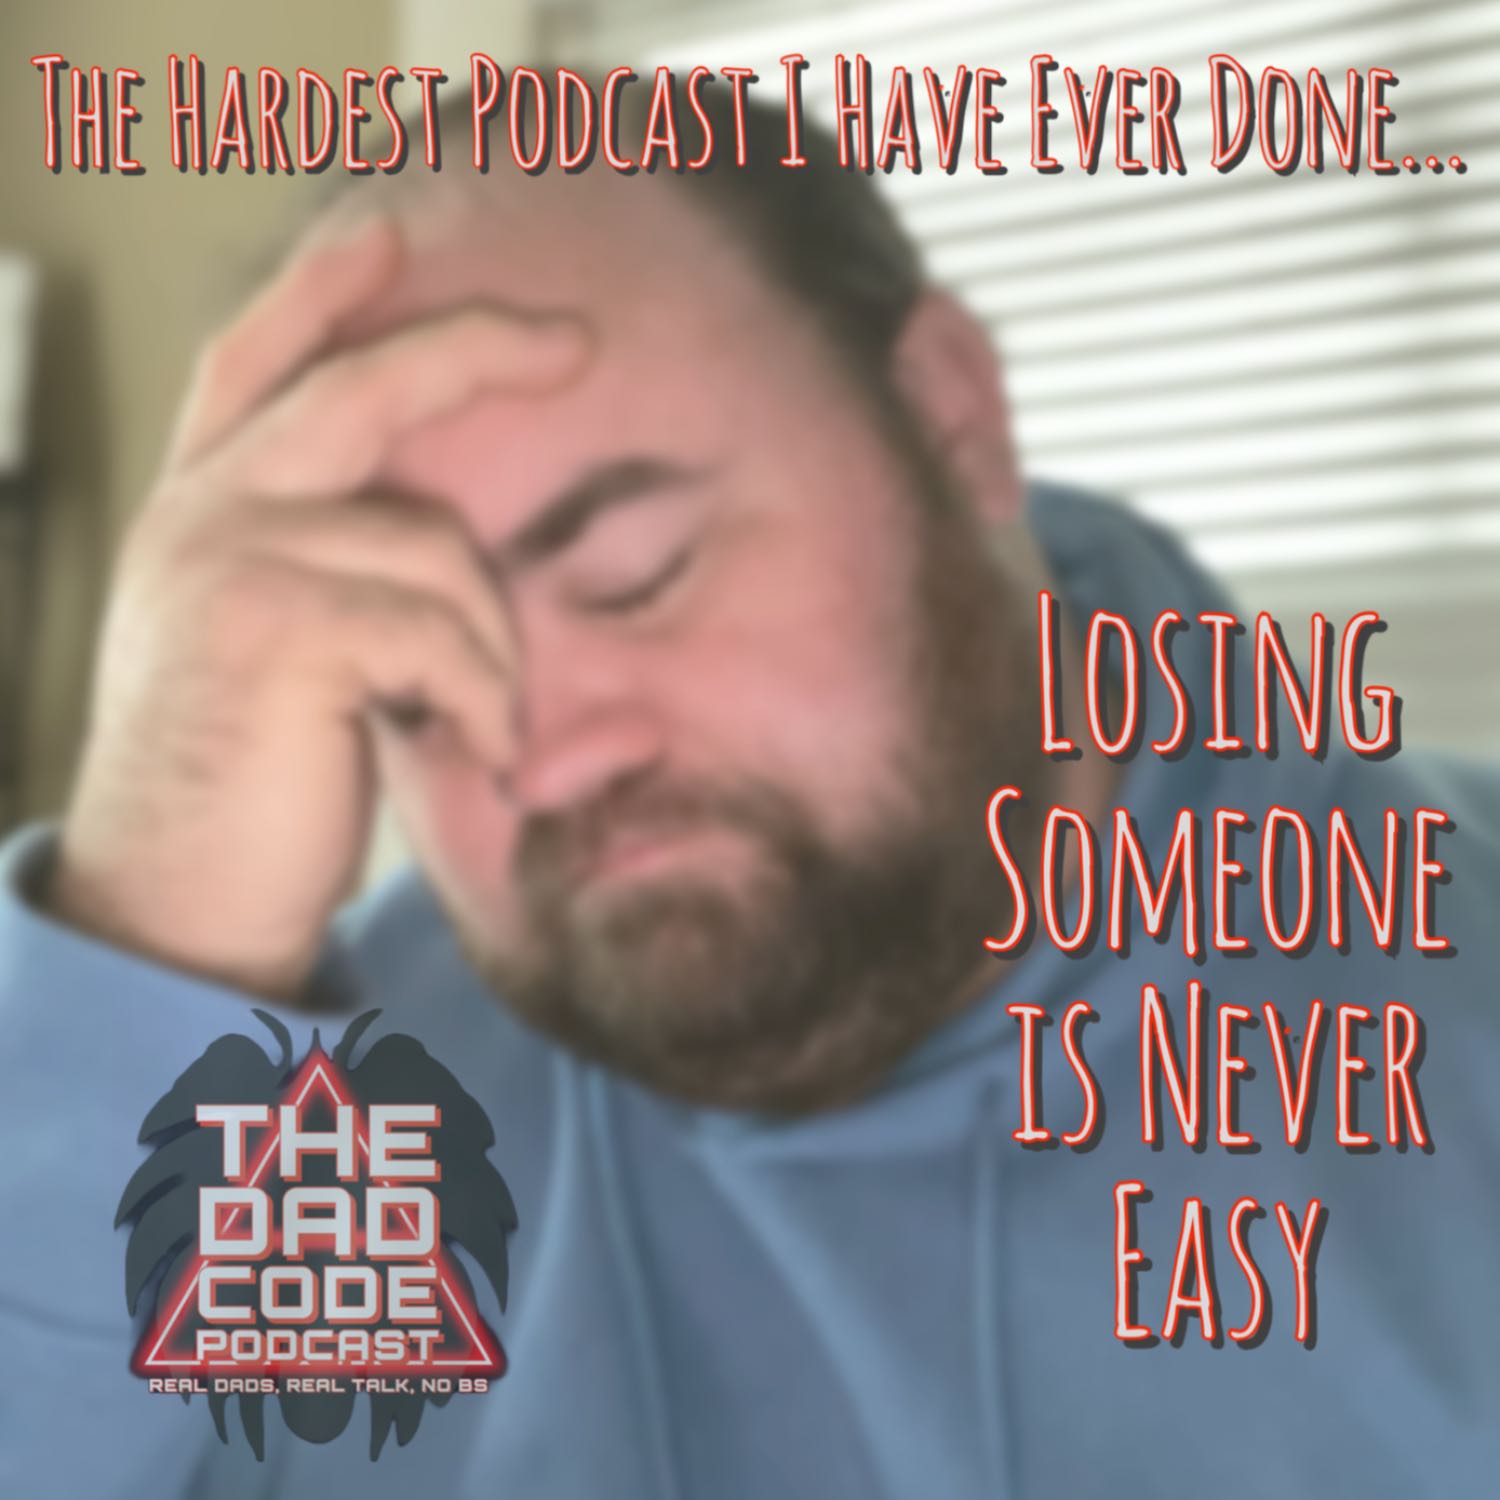 Dealing With Loss Is Not Easy: This Was the Hardest Podcast I Have Ever Done